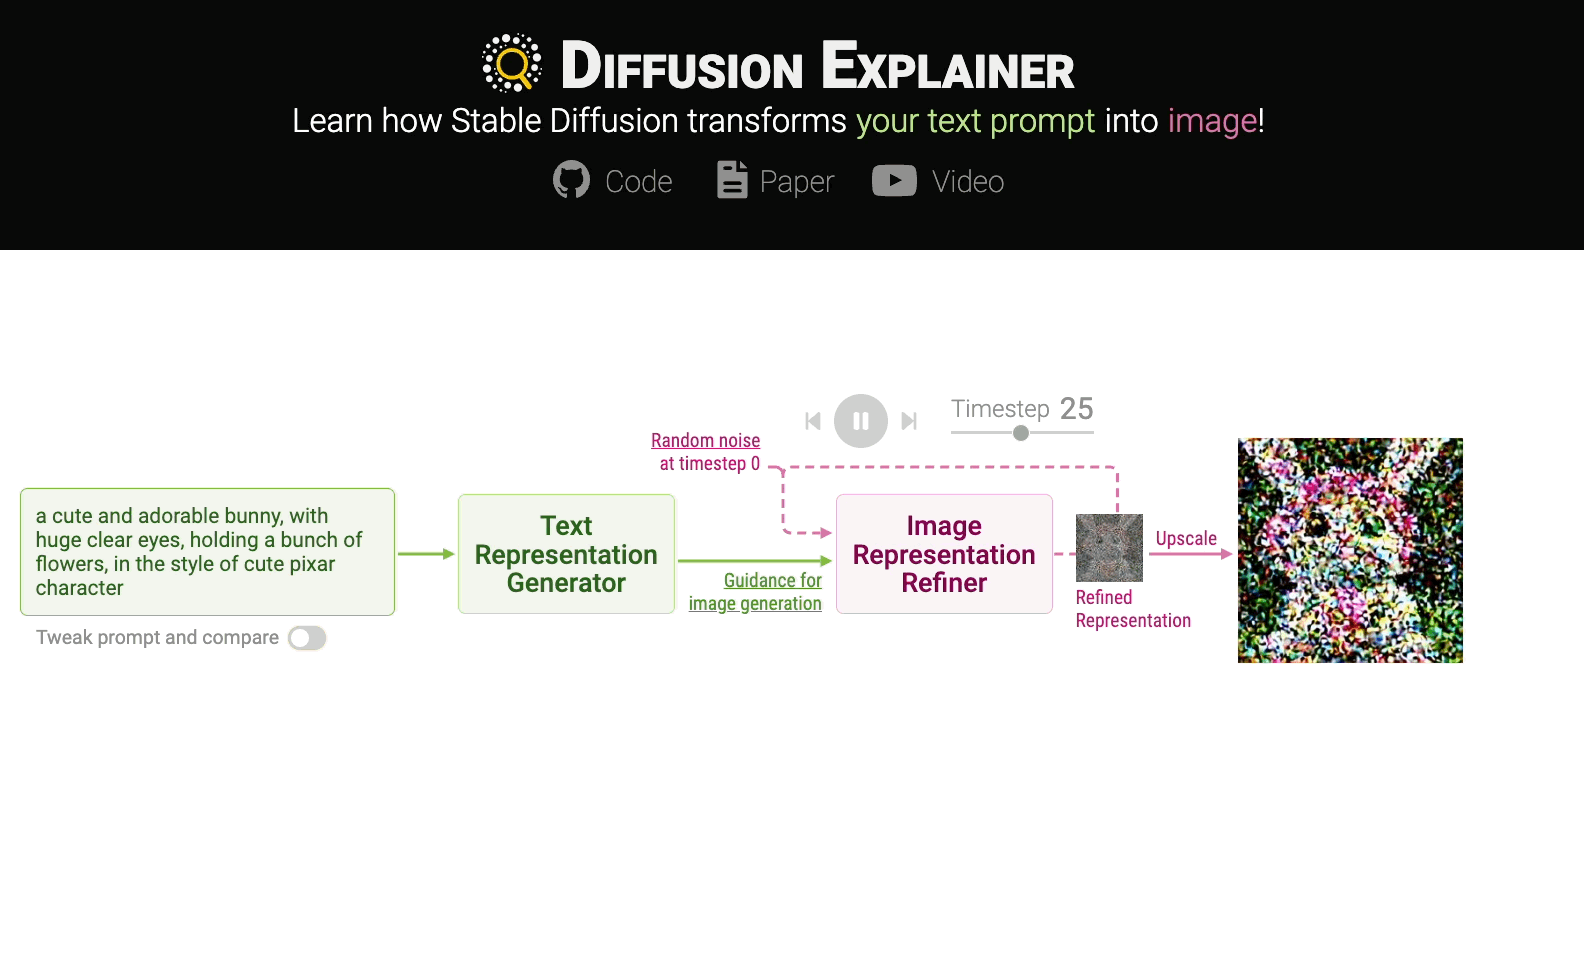 Diffusion Explainer: Learn how Stable Diffusion transforms your text prompt into image!